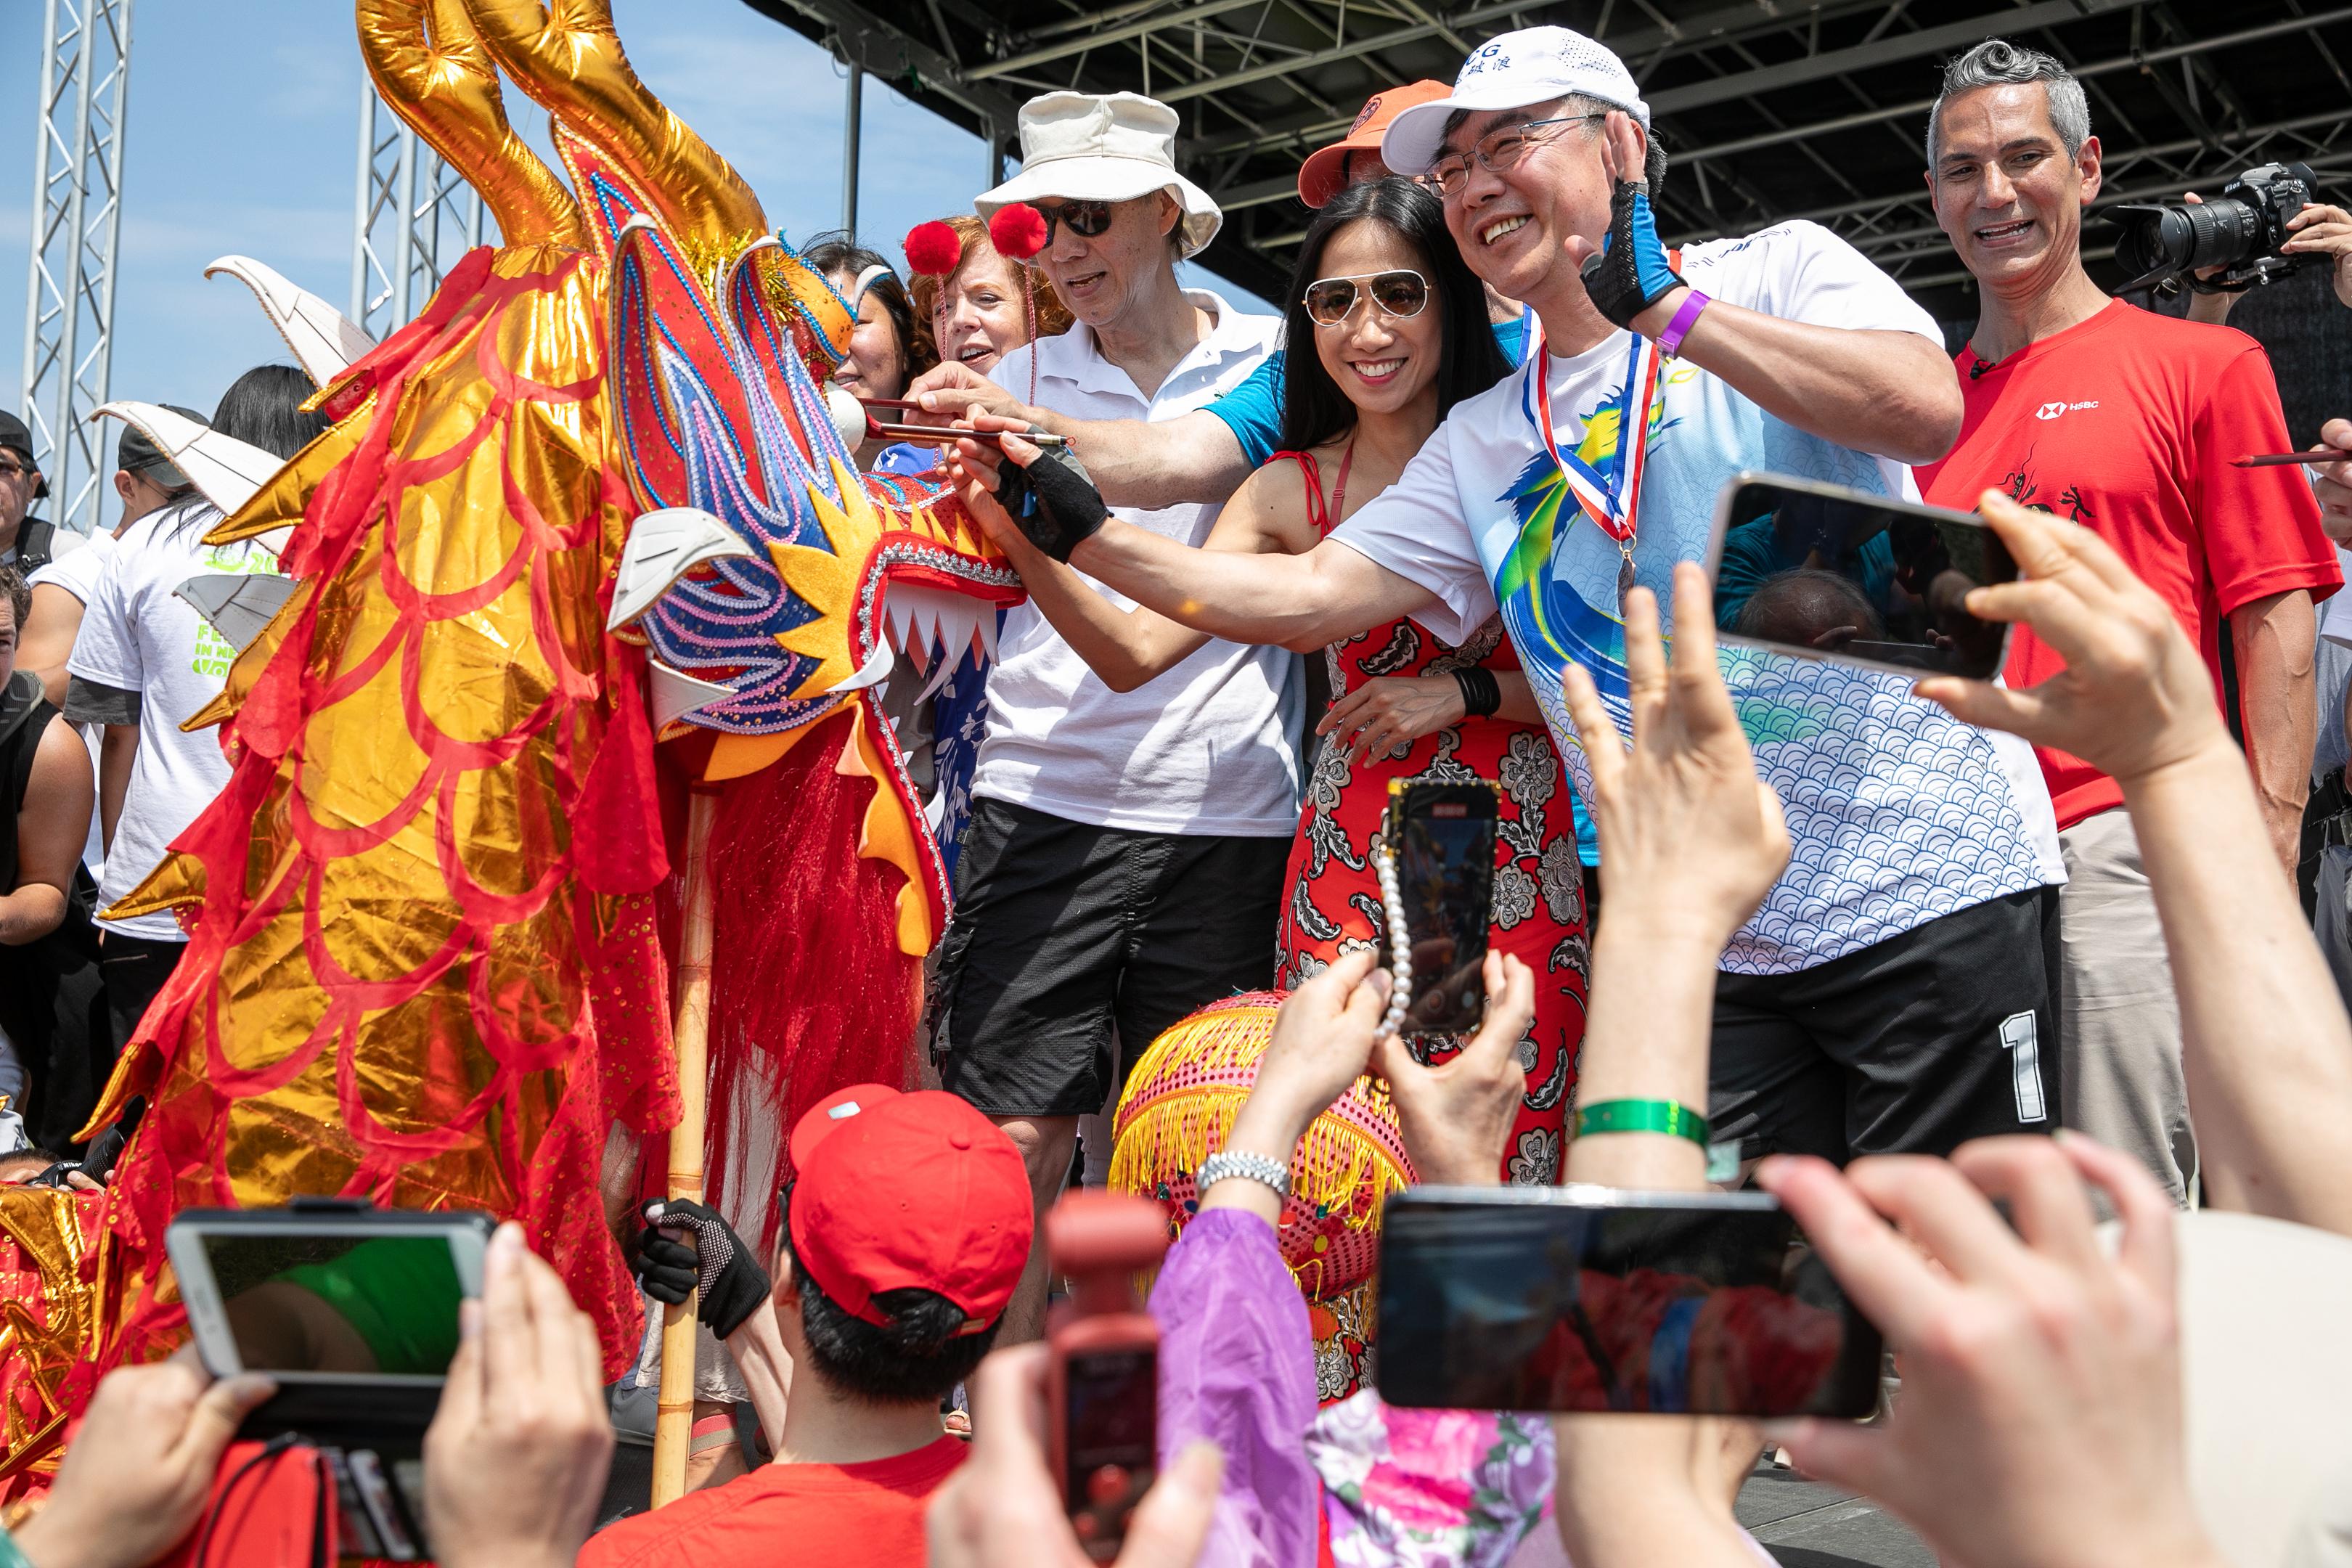 The 31st edition of the Hong Kong Dragon Boat Festival in New York was held at the Flushing Meadows Corona Park on August 12 and 13 (New York time). Photo shows the Director of the Hong Kong Economic and Trade Office in New York, Ms Candy Nip (third right); the Chairman of the Hong Kong Dragon Boat Festival in New York Inc., Mr Henry Wan (fourth right), and other guests take part in the eye-dotting ceremony at the opening ceremony of the Hong Kong Dragon Boat Festival in New York on August 12 (New York time).